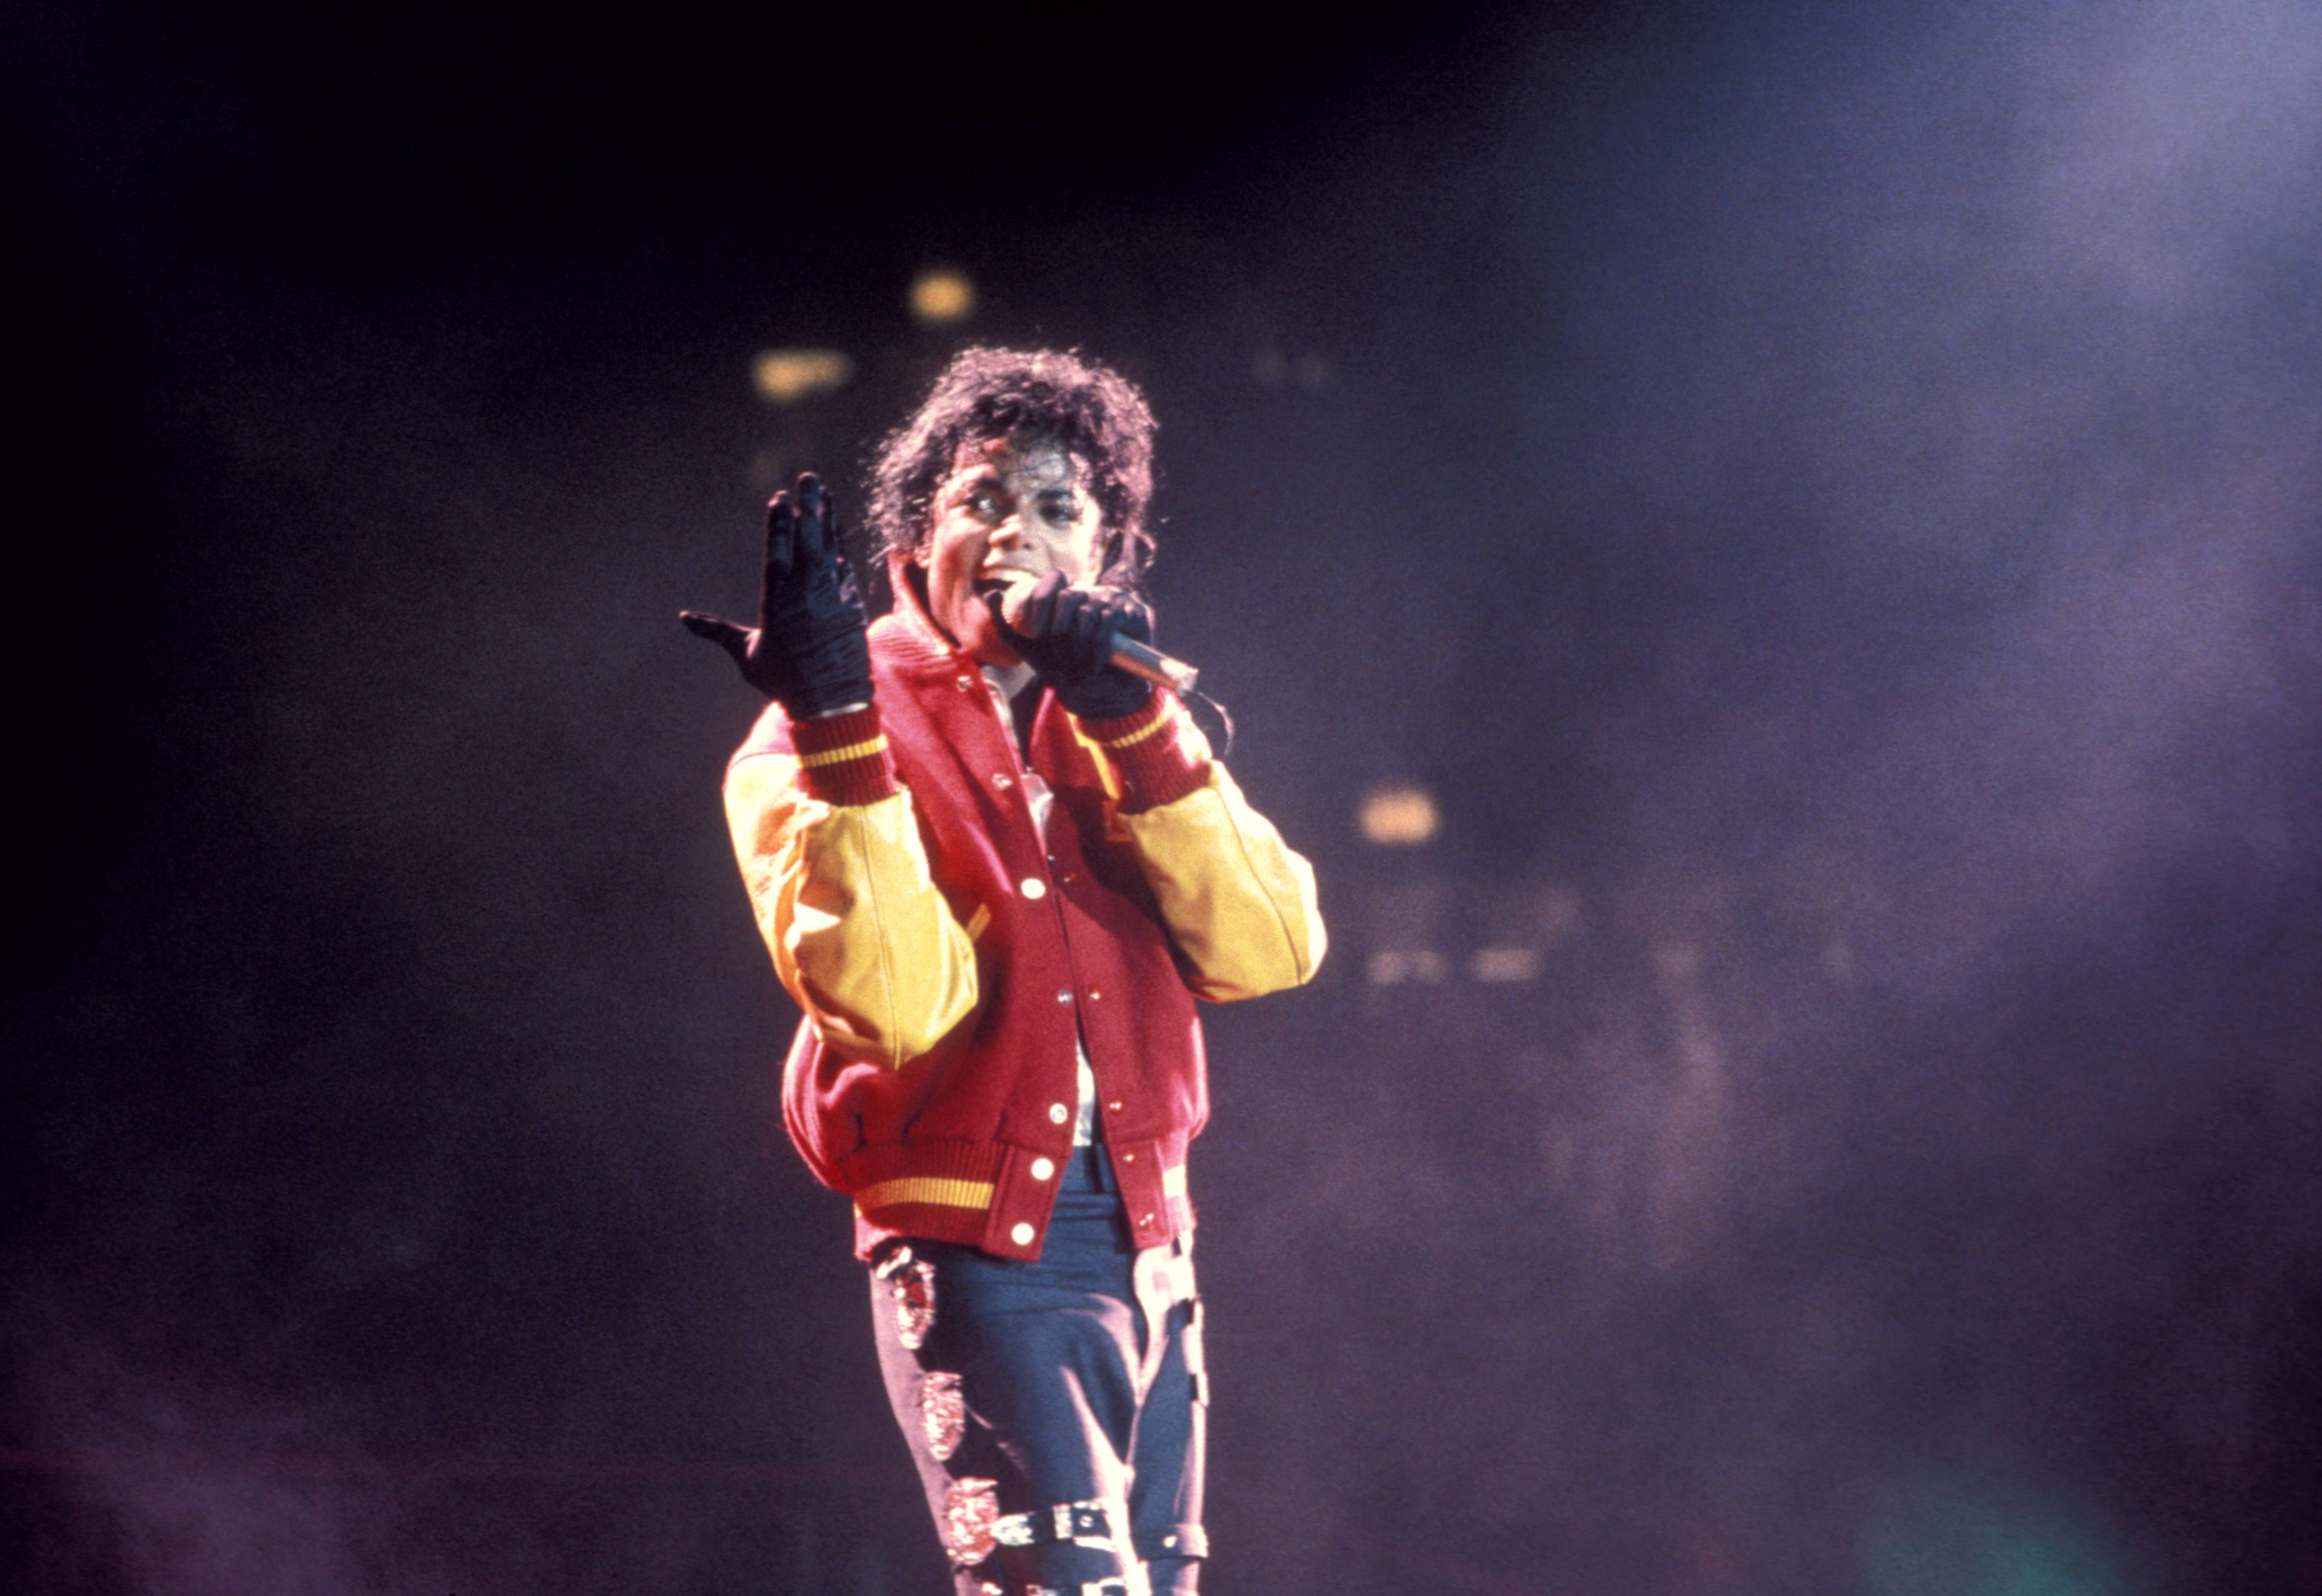 Michael Jackson performing on stage, performing 'Thriller - Bad Tour'